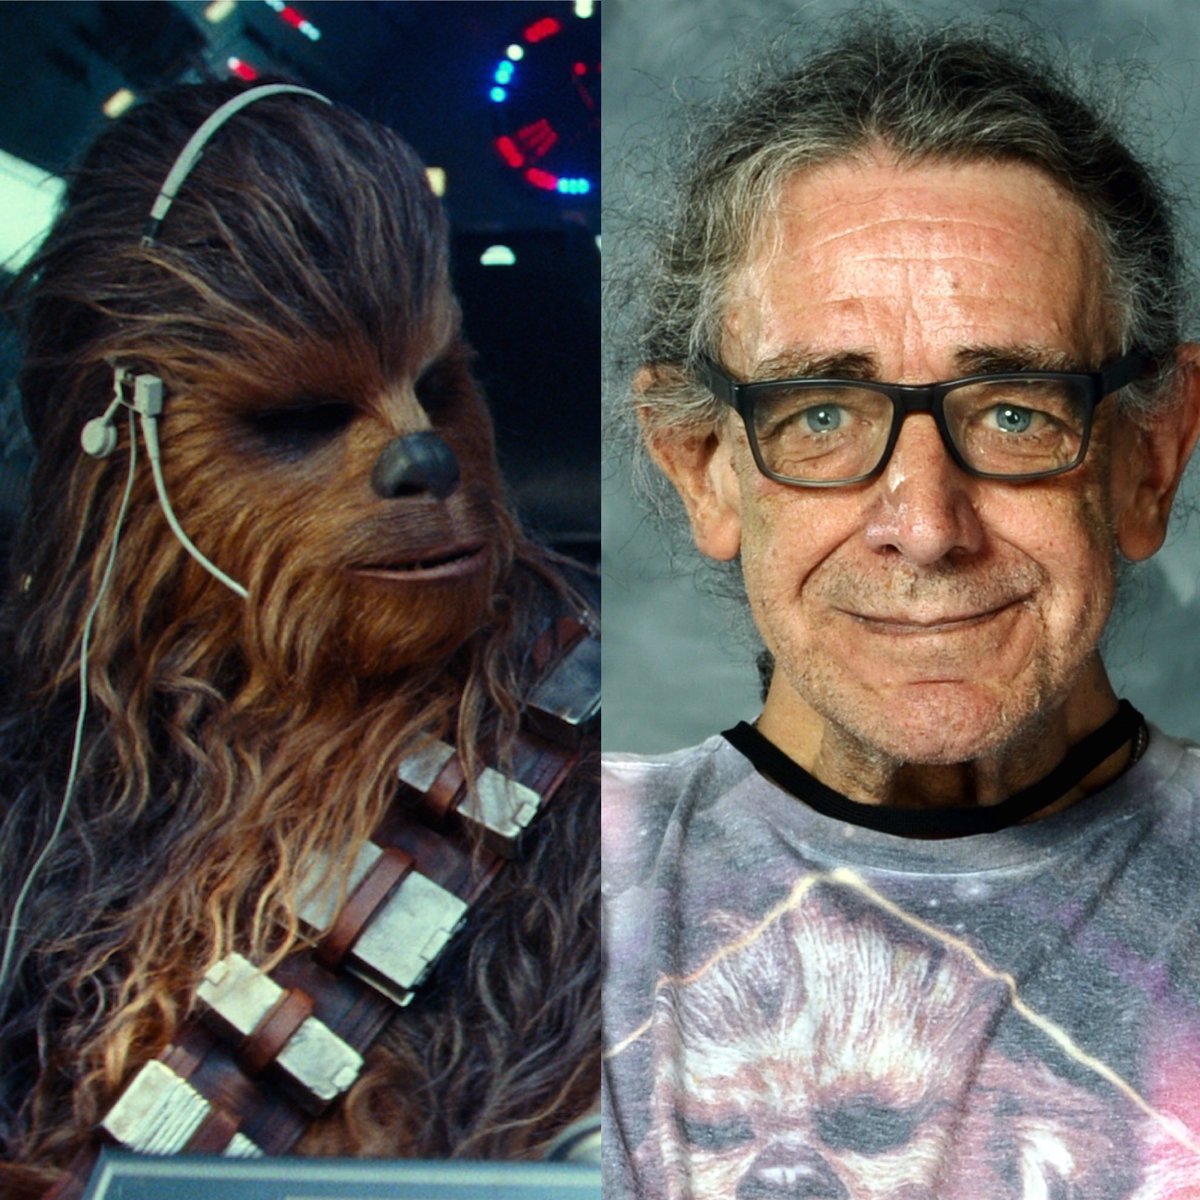 Did you know Peter Mayhew lived in Boyd for years? I would love to paint a memorial to him here in Boyd but I would want permission from his family and Disney. I remember being in school as a kid and another kid saying Chewbacca lives in Boyd but I didn’t believe him. #chewbacca https://t.co/LxCXcBcHdC